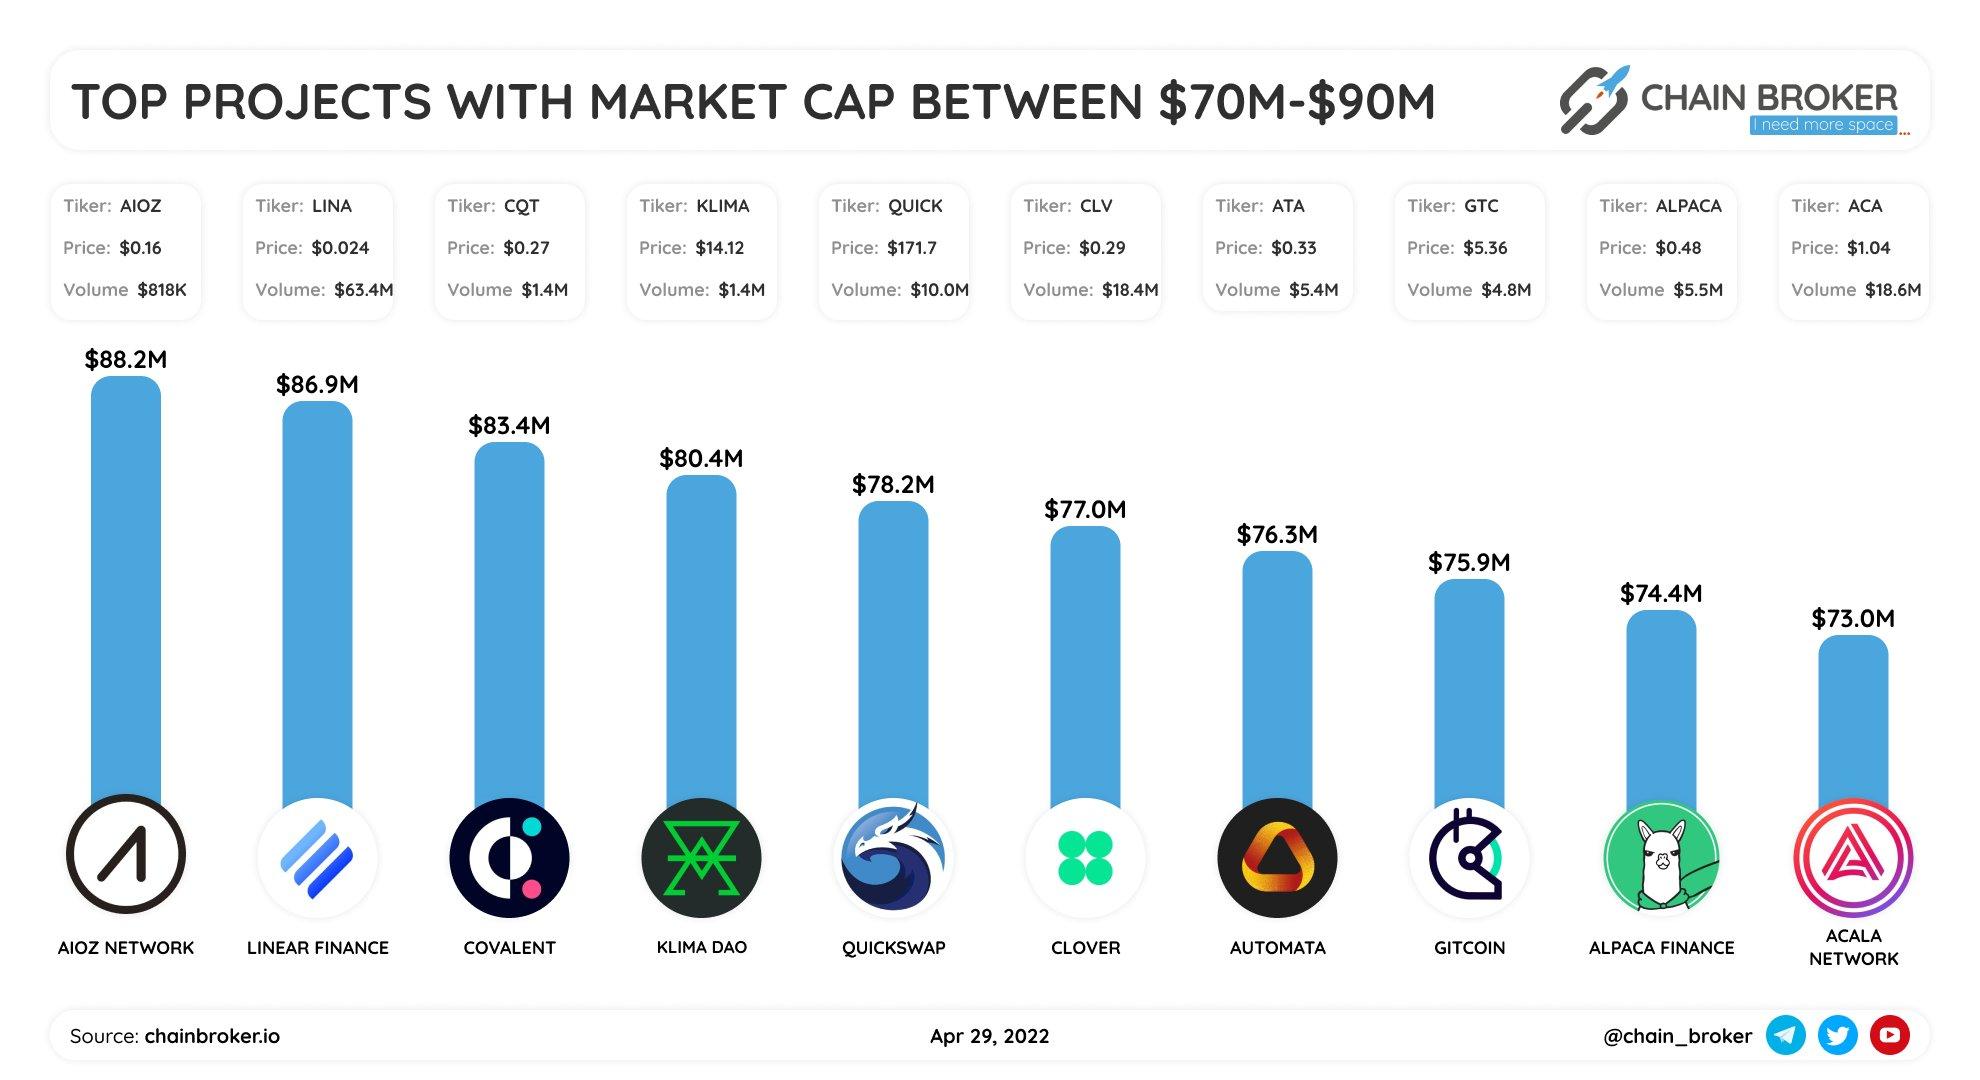 Top projects with market cap between $70M-$90M